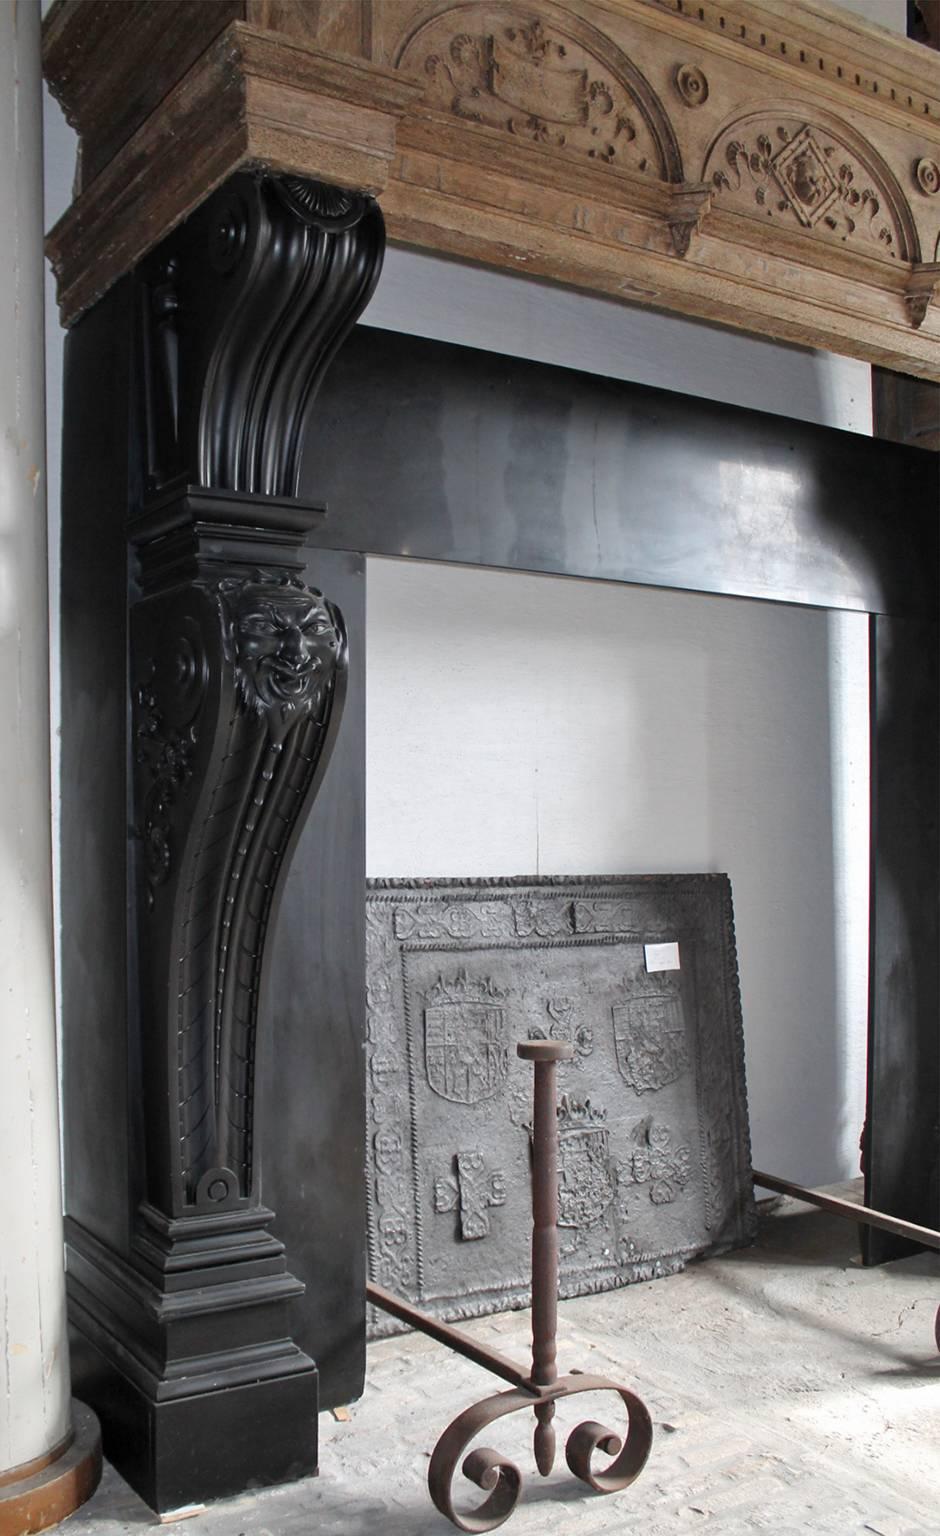 Dutch Antique Marble Fireplace with a Wooden Mantel on Top